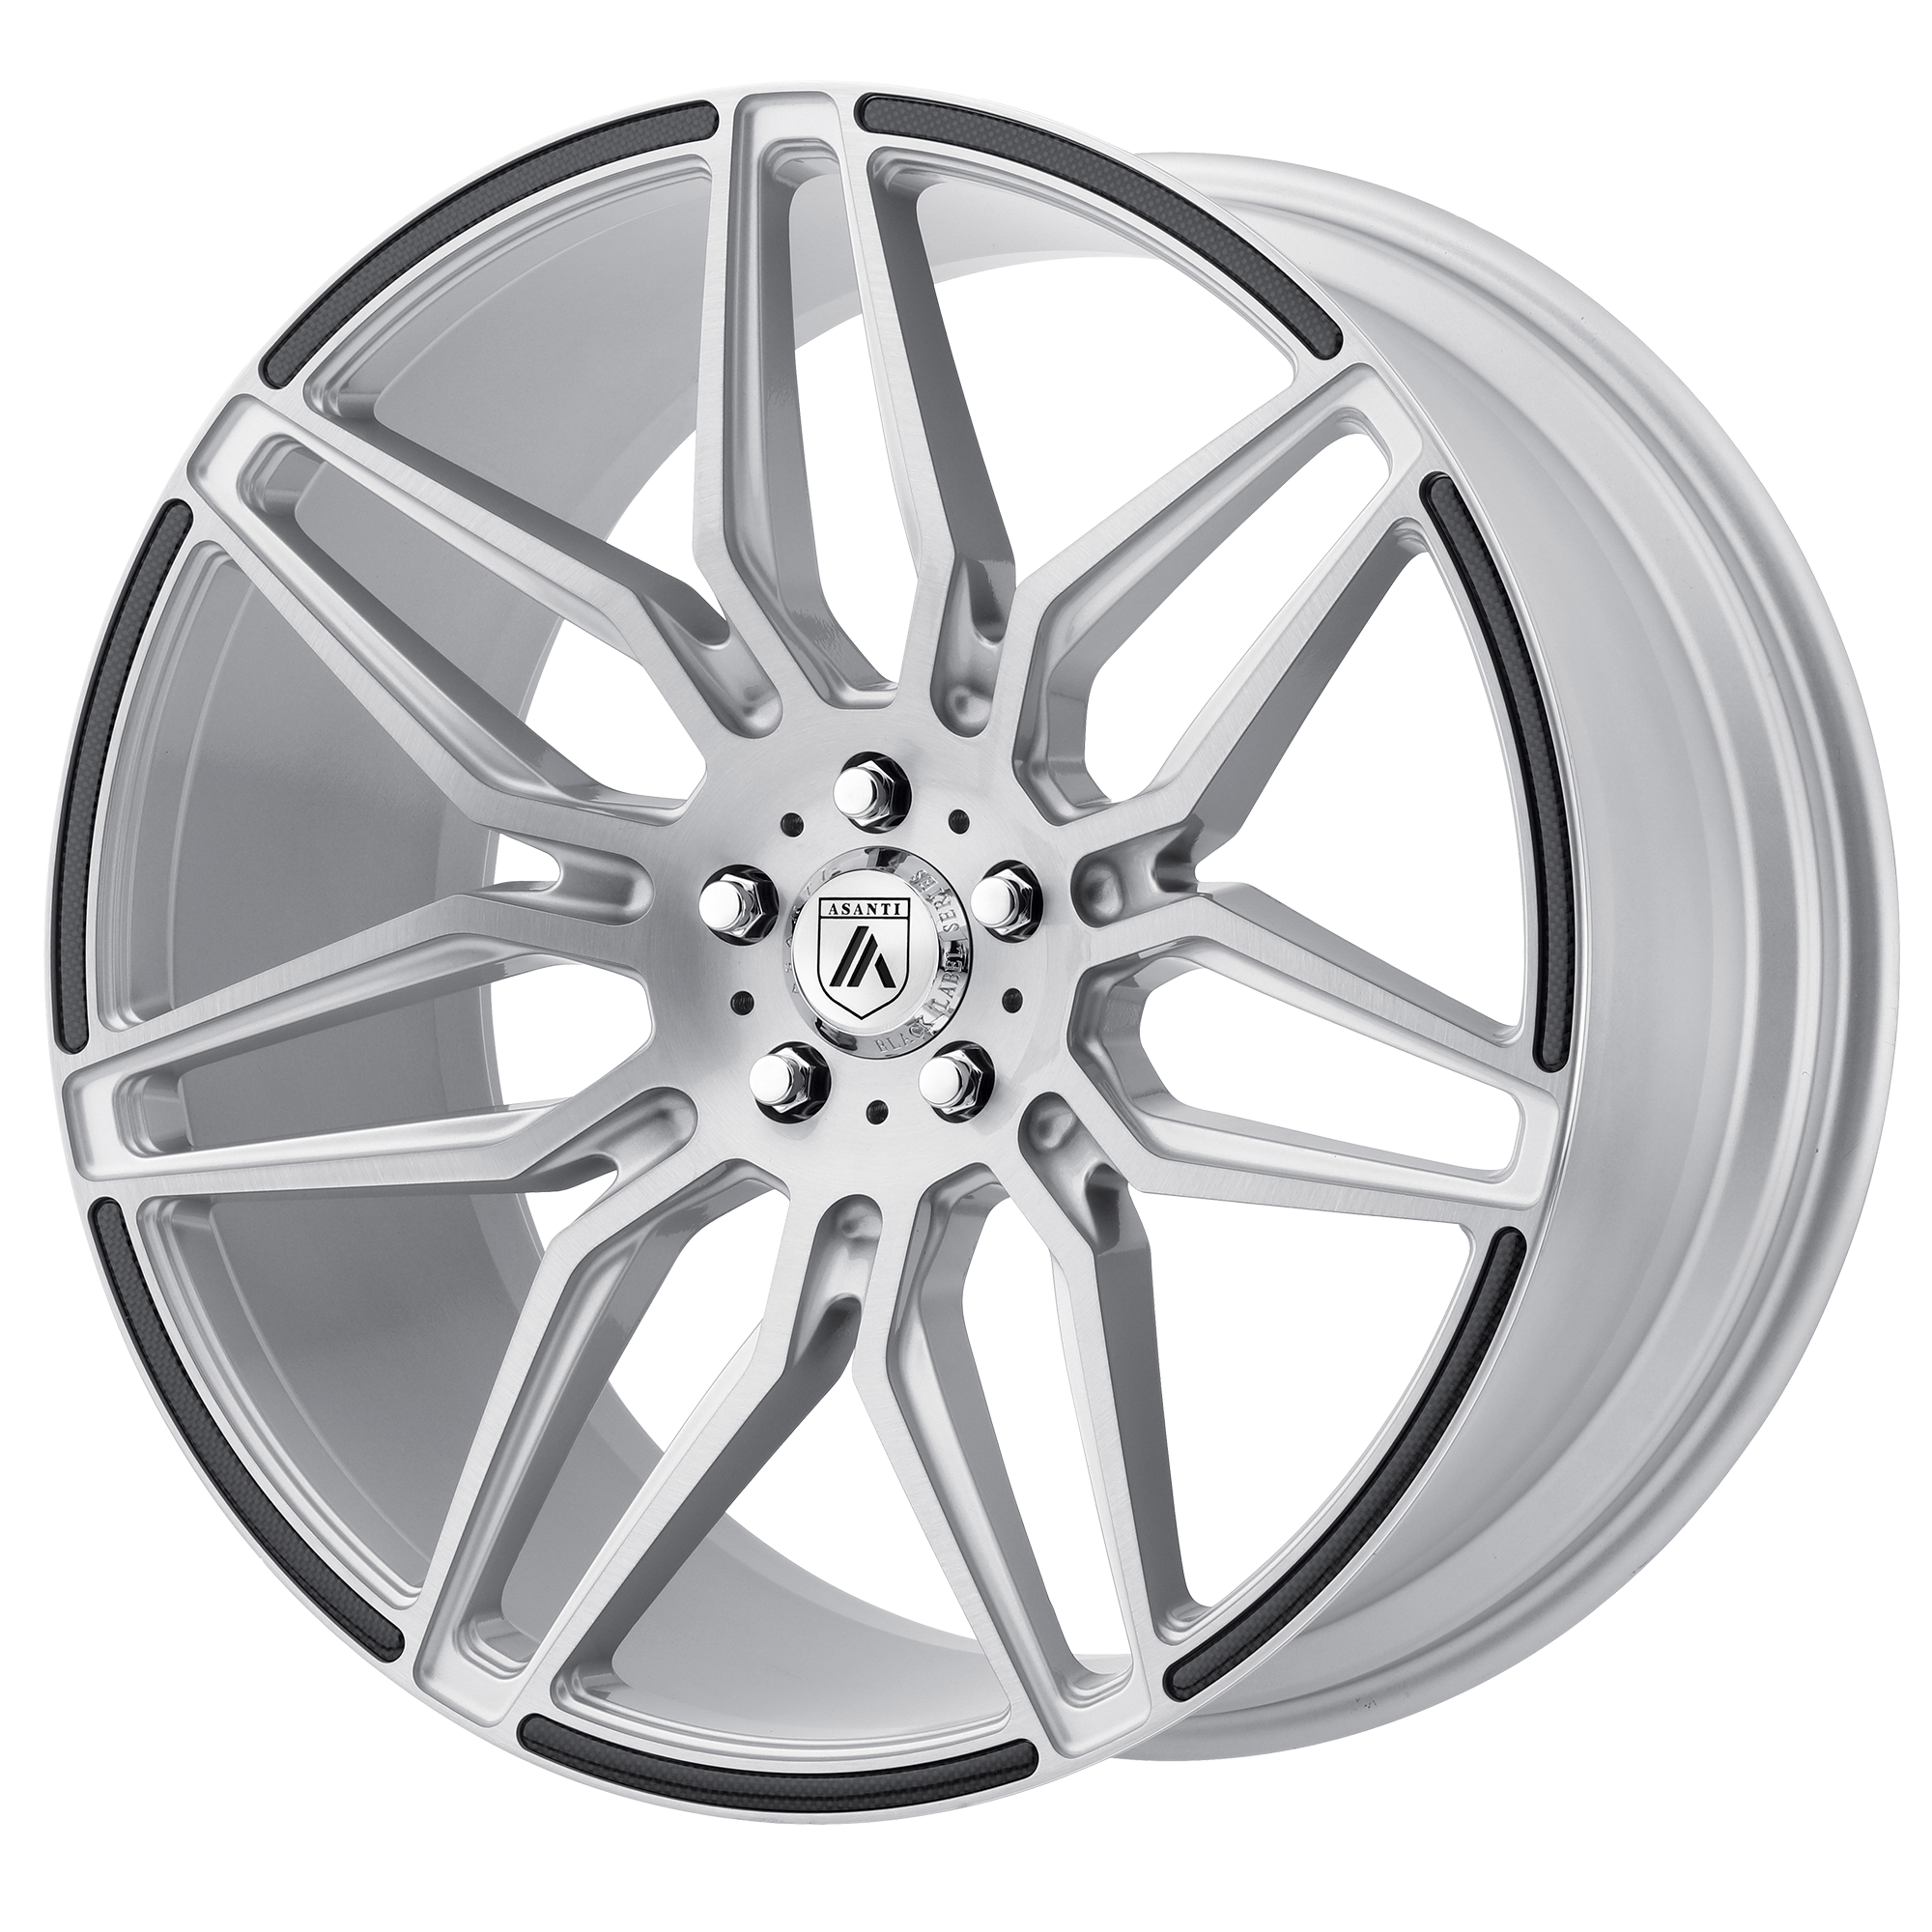 SIRIUS 22x9 5x114.30 BRUSHED SILVER W/ CARBON FIBER INSERTS (32 mm) - Tires and Engine Performance